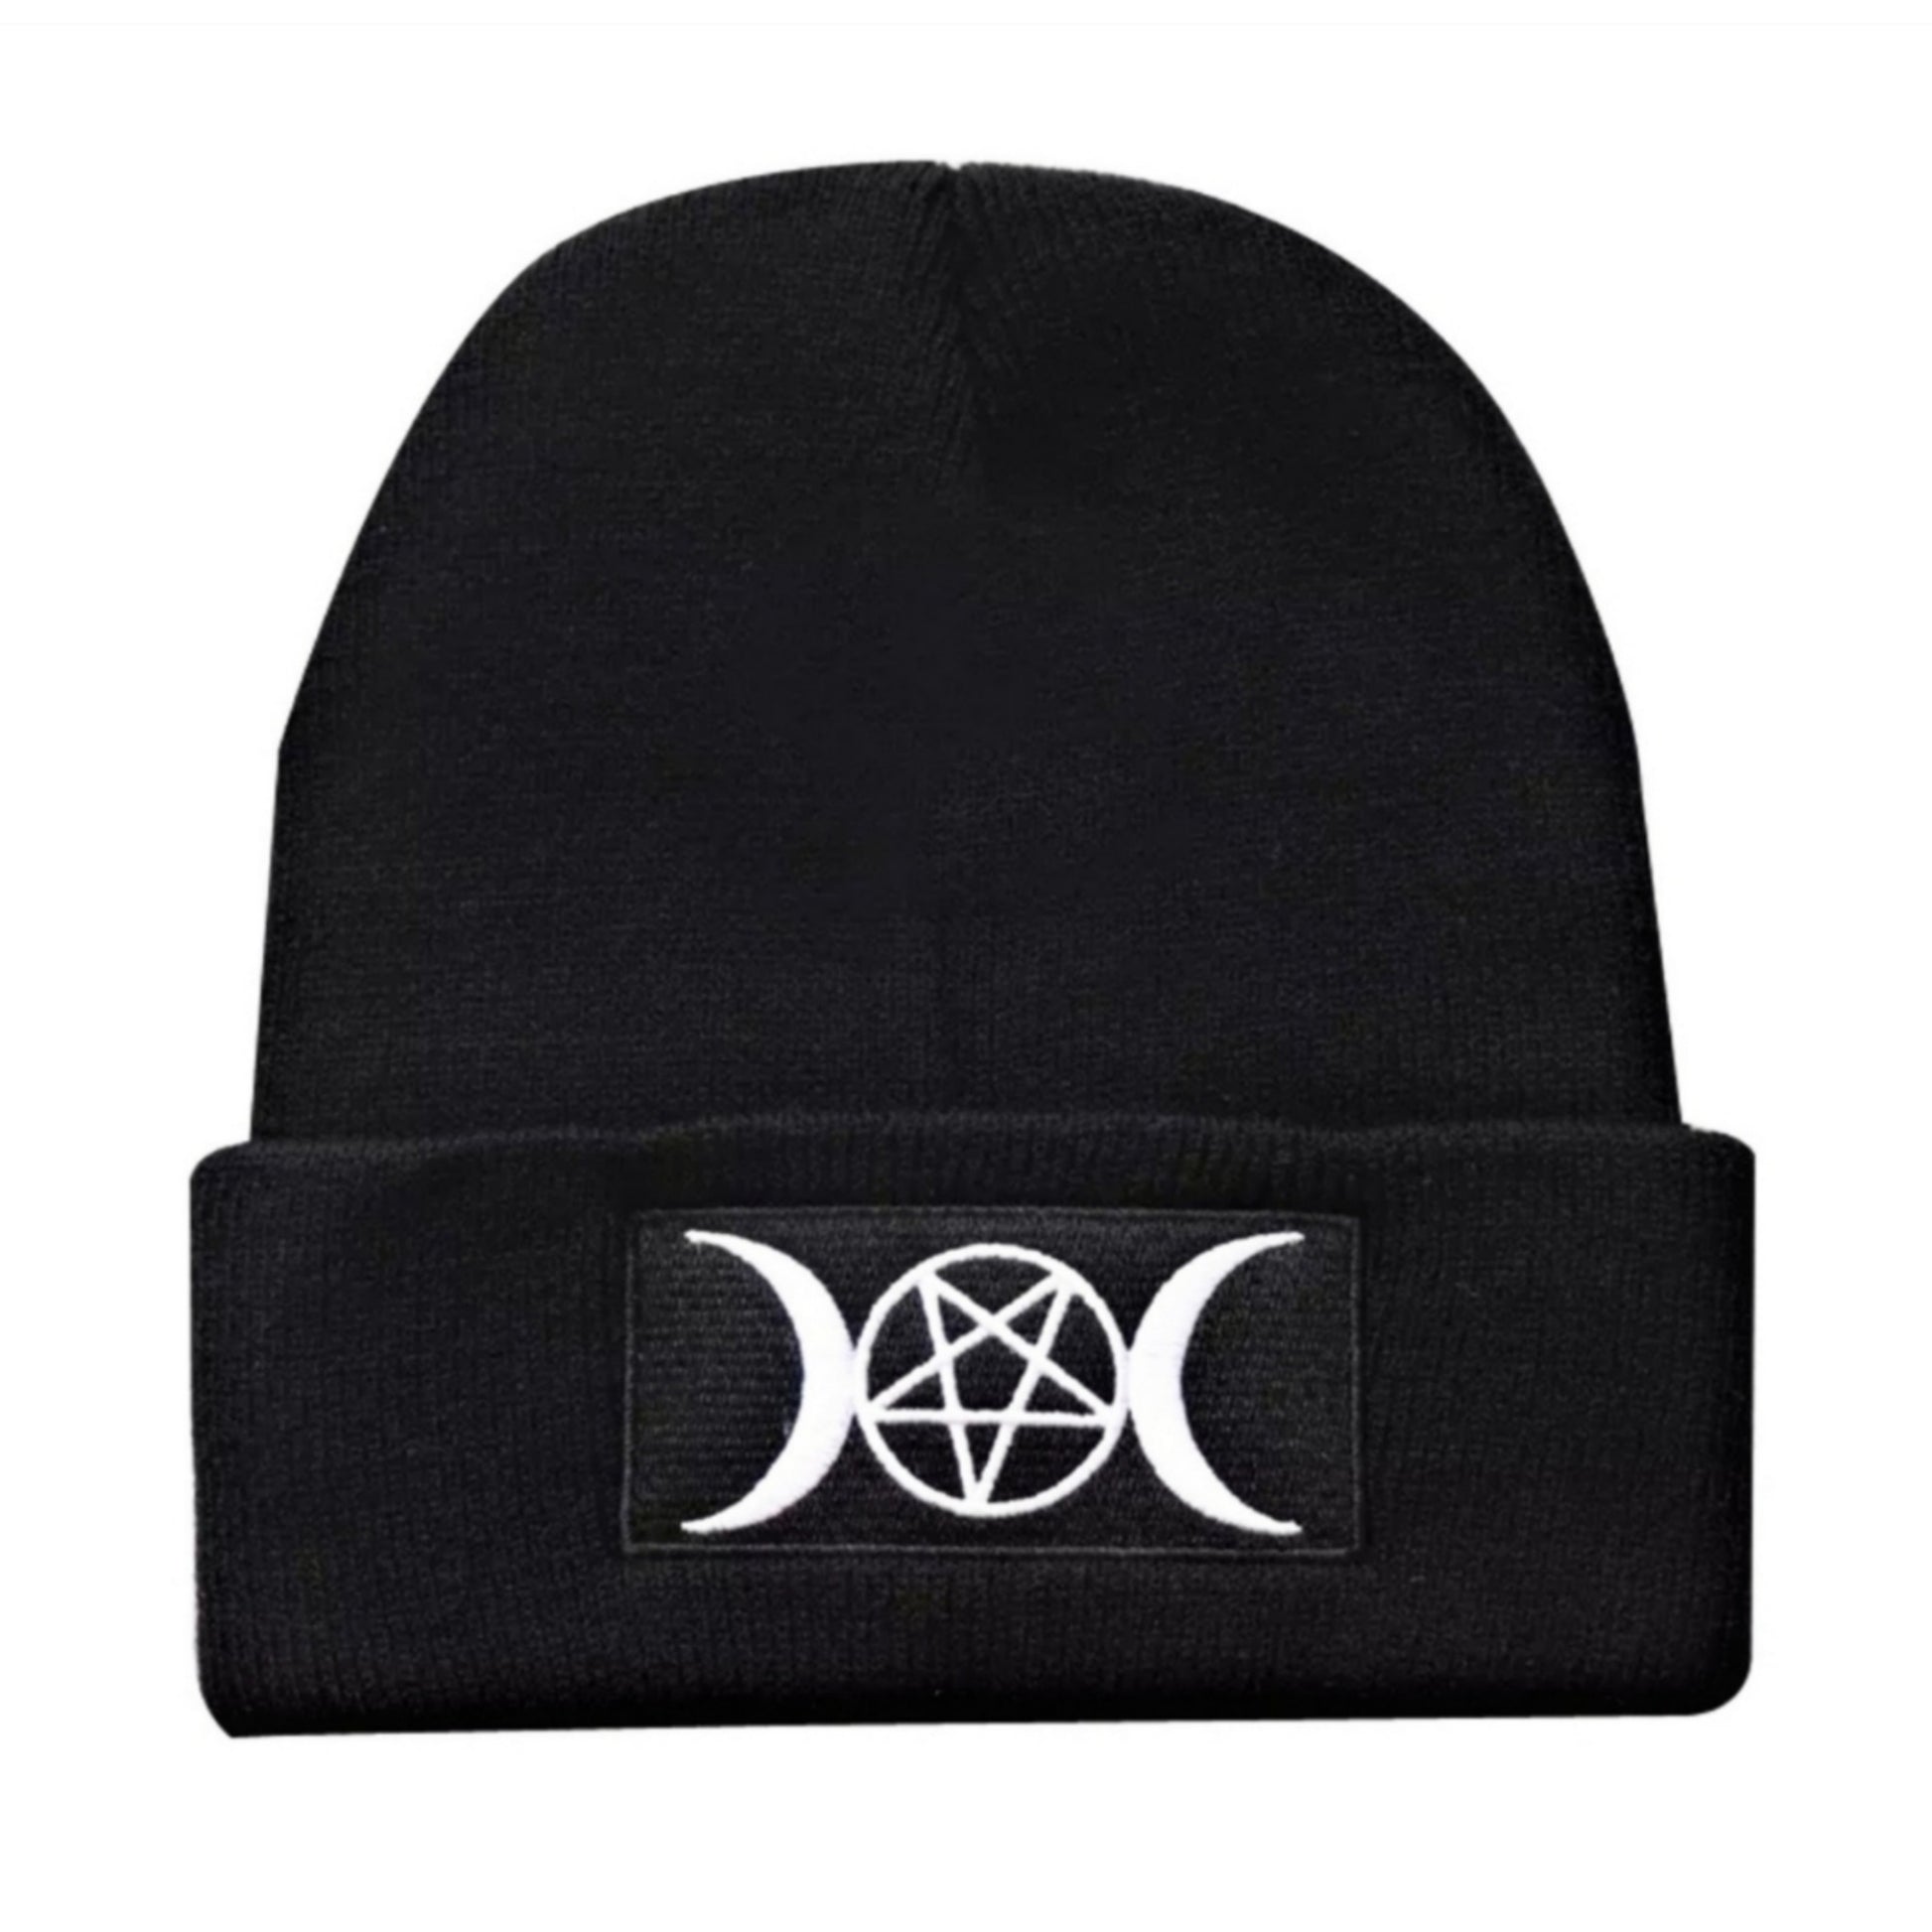 Black Triple Moon Goddess Beanie | Scully White Embroidered Moons & Pentagram - A Gothic Universe - Beanies